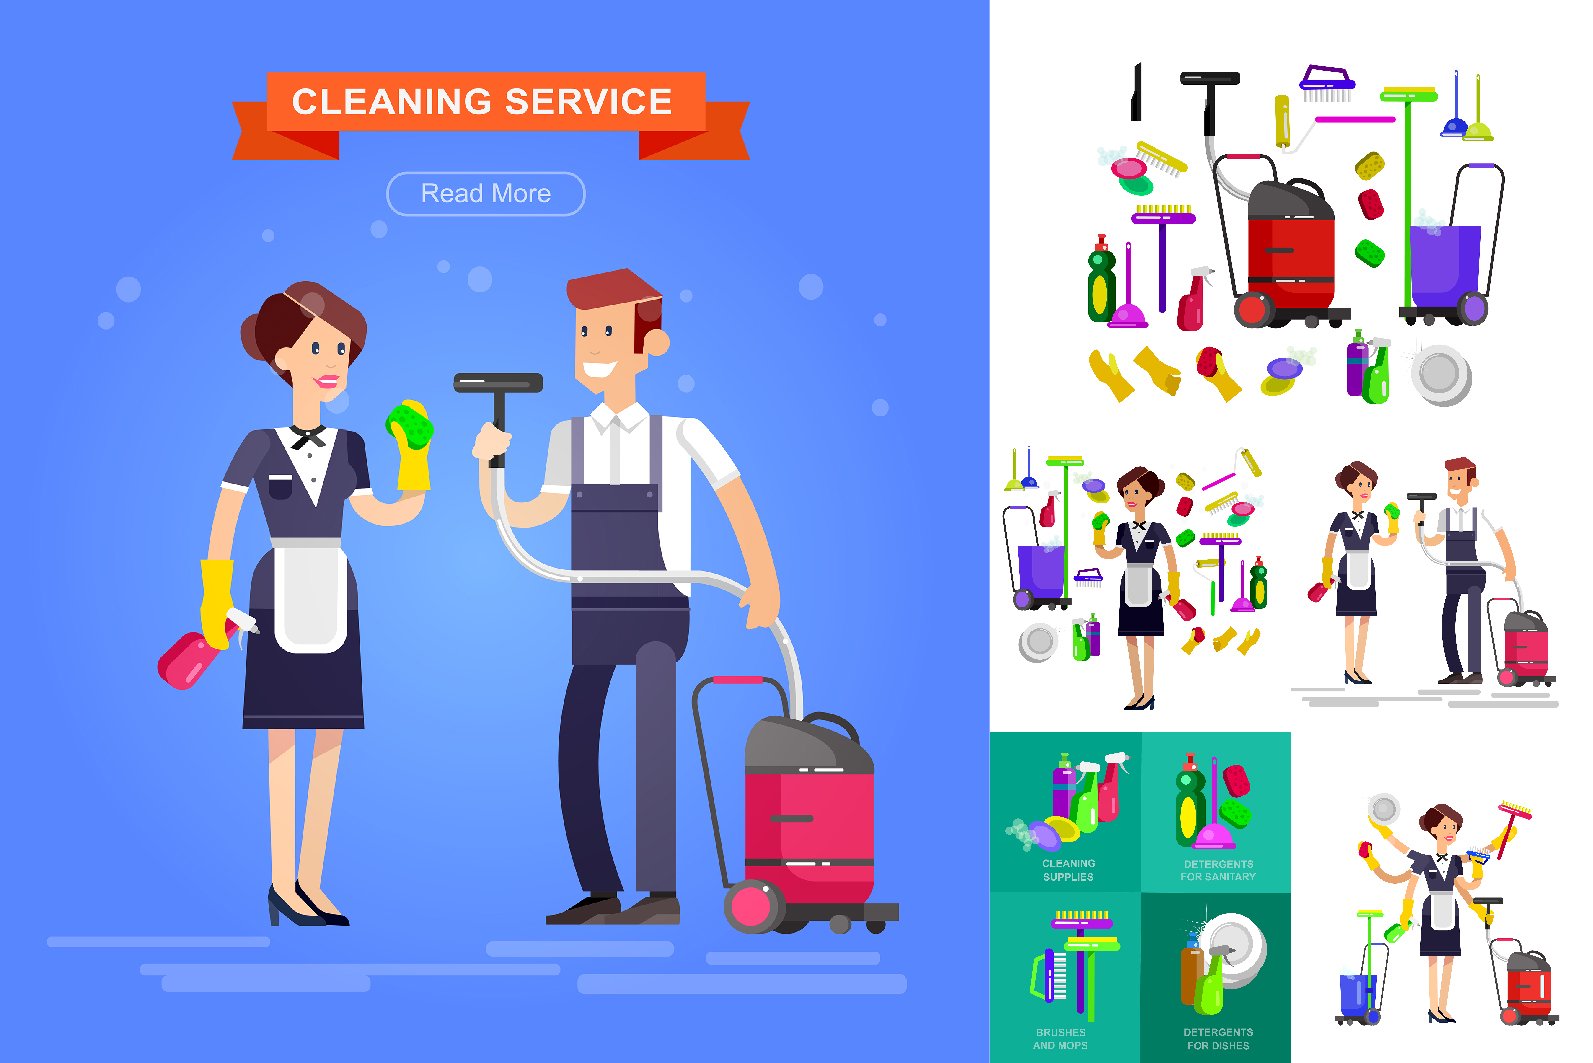 Cleaning service characters cover image.